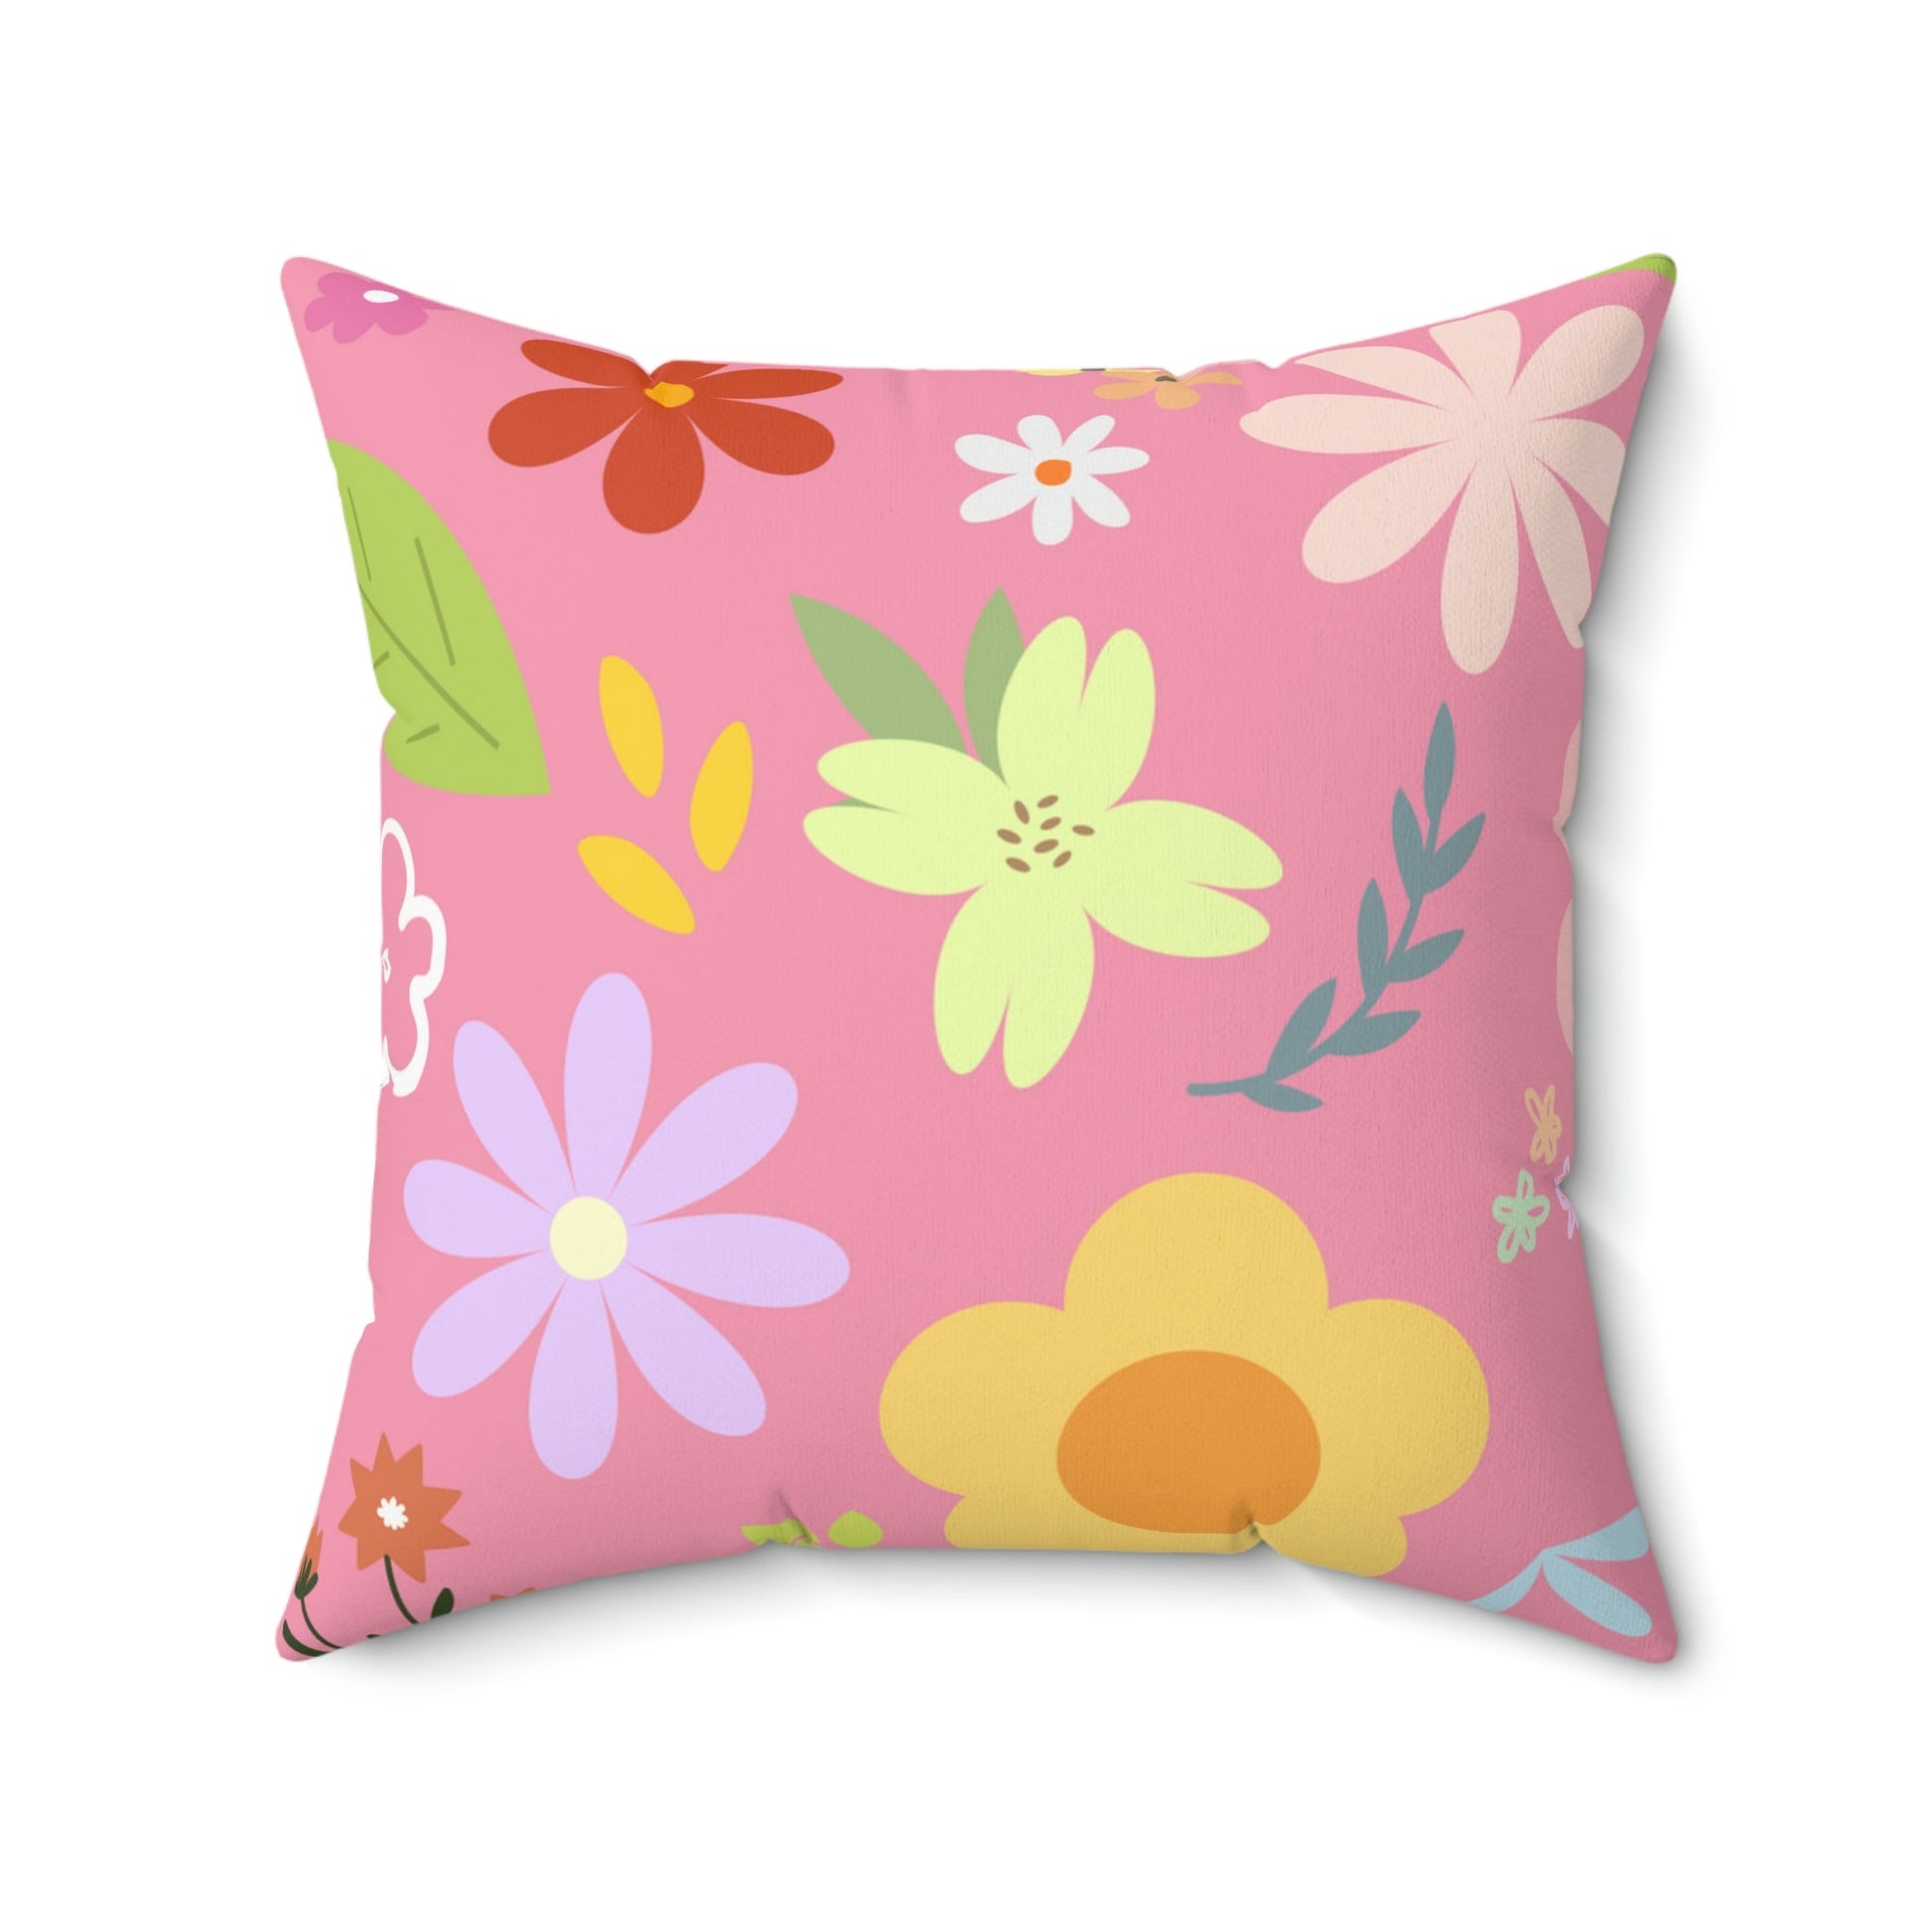 Spring Time Vibes Square Pillow Home Decor Pink Sweetheart